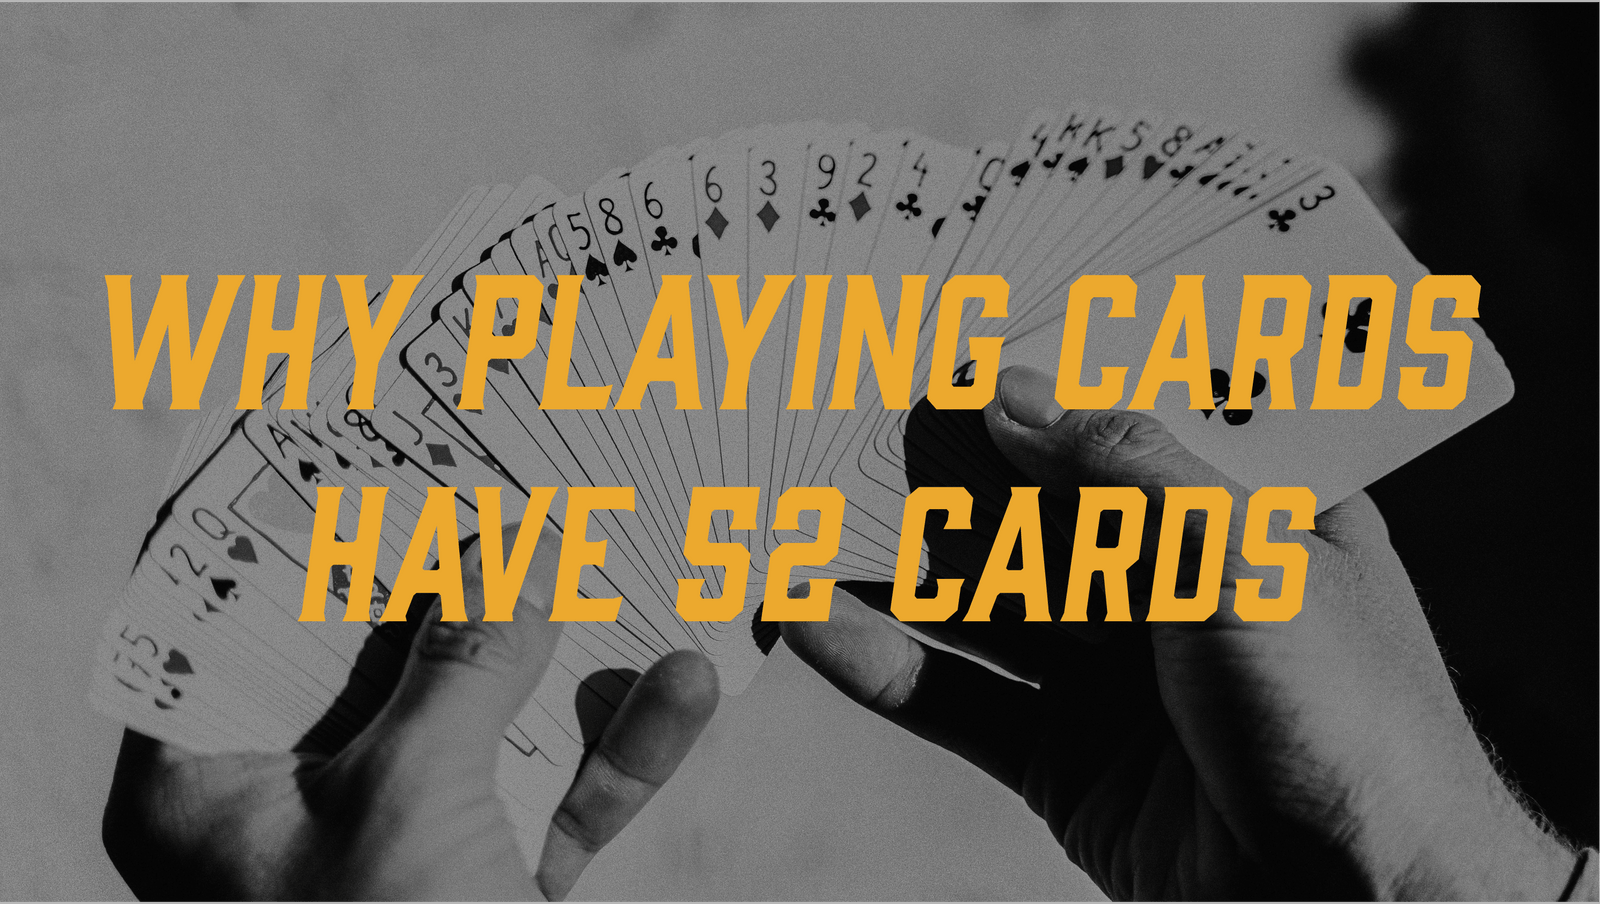 Why Do Playing Cards Have 52 Cards?